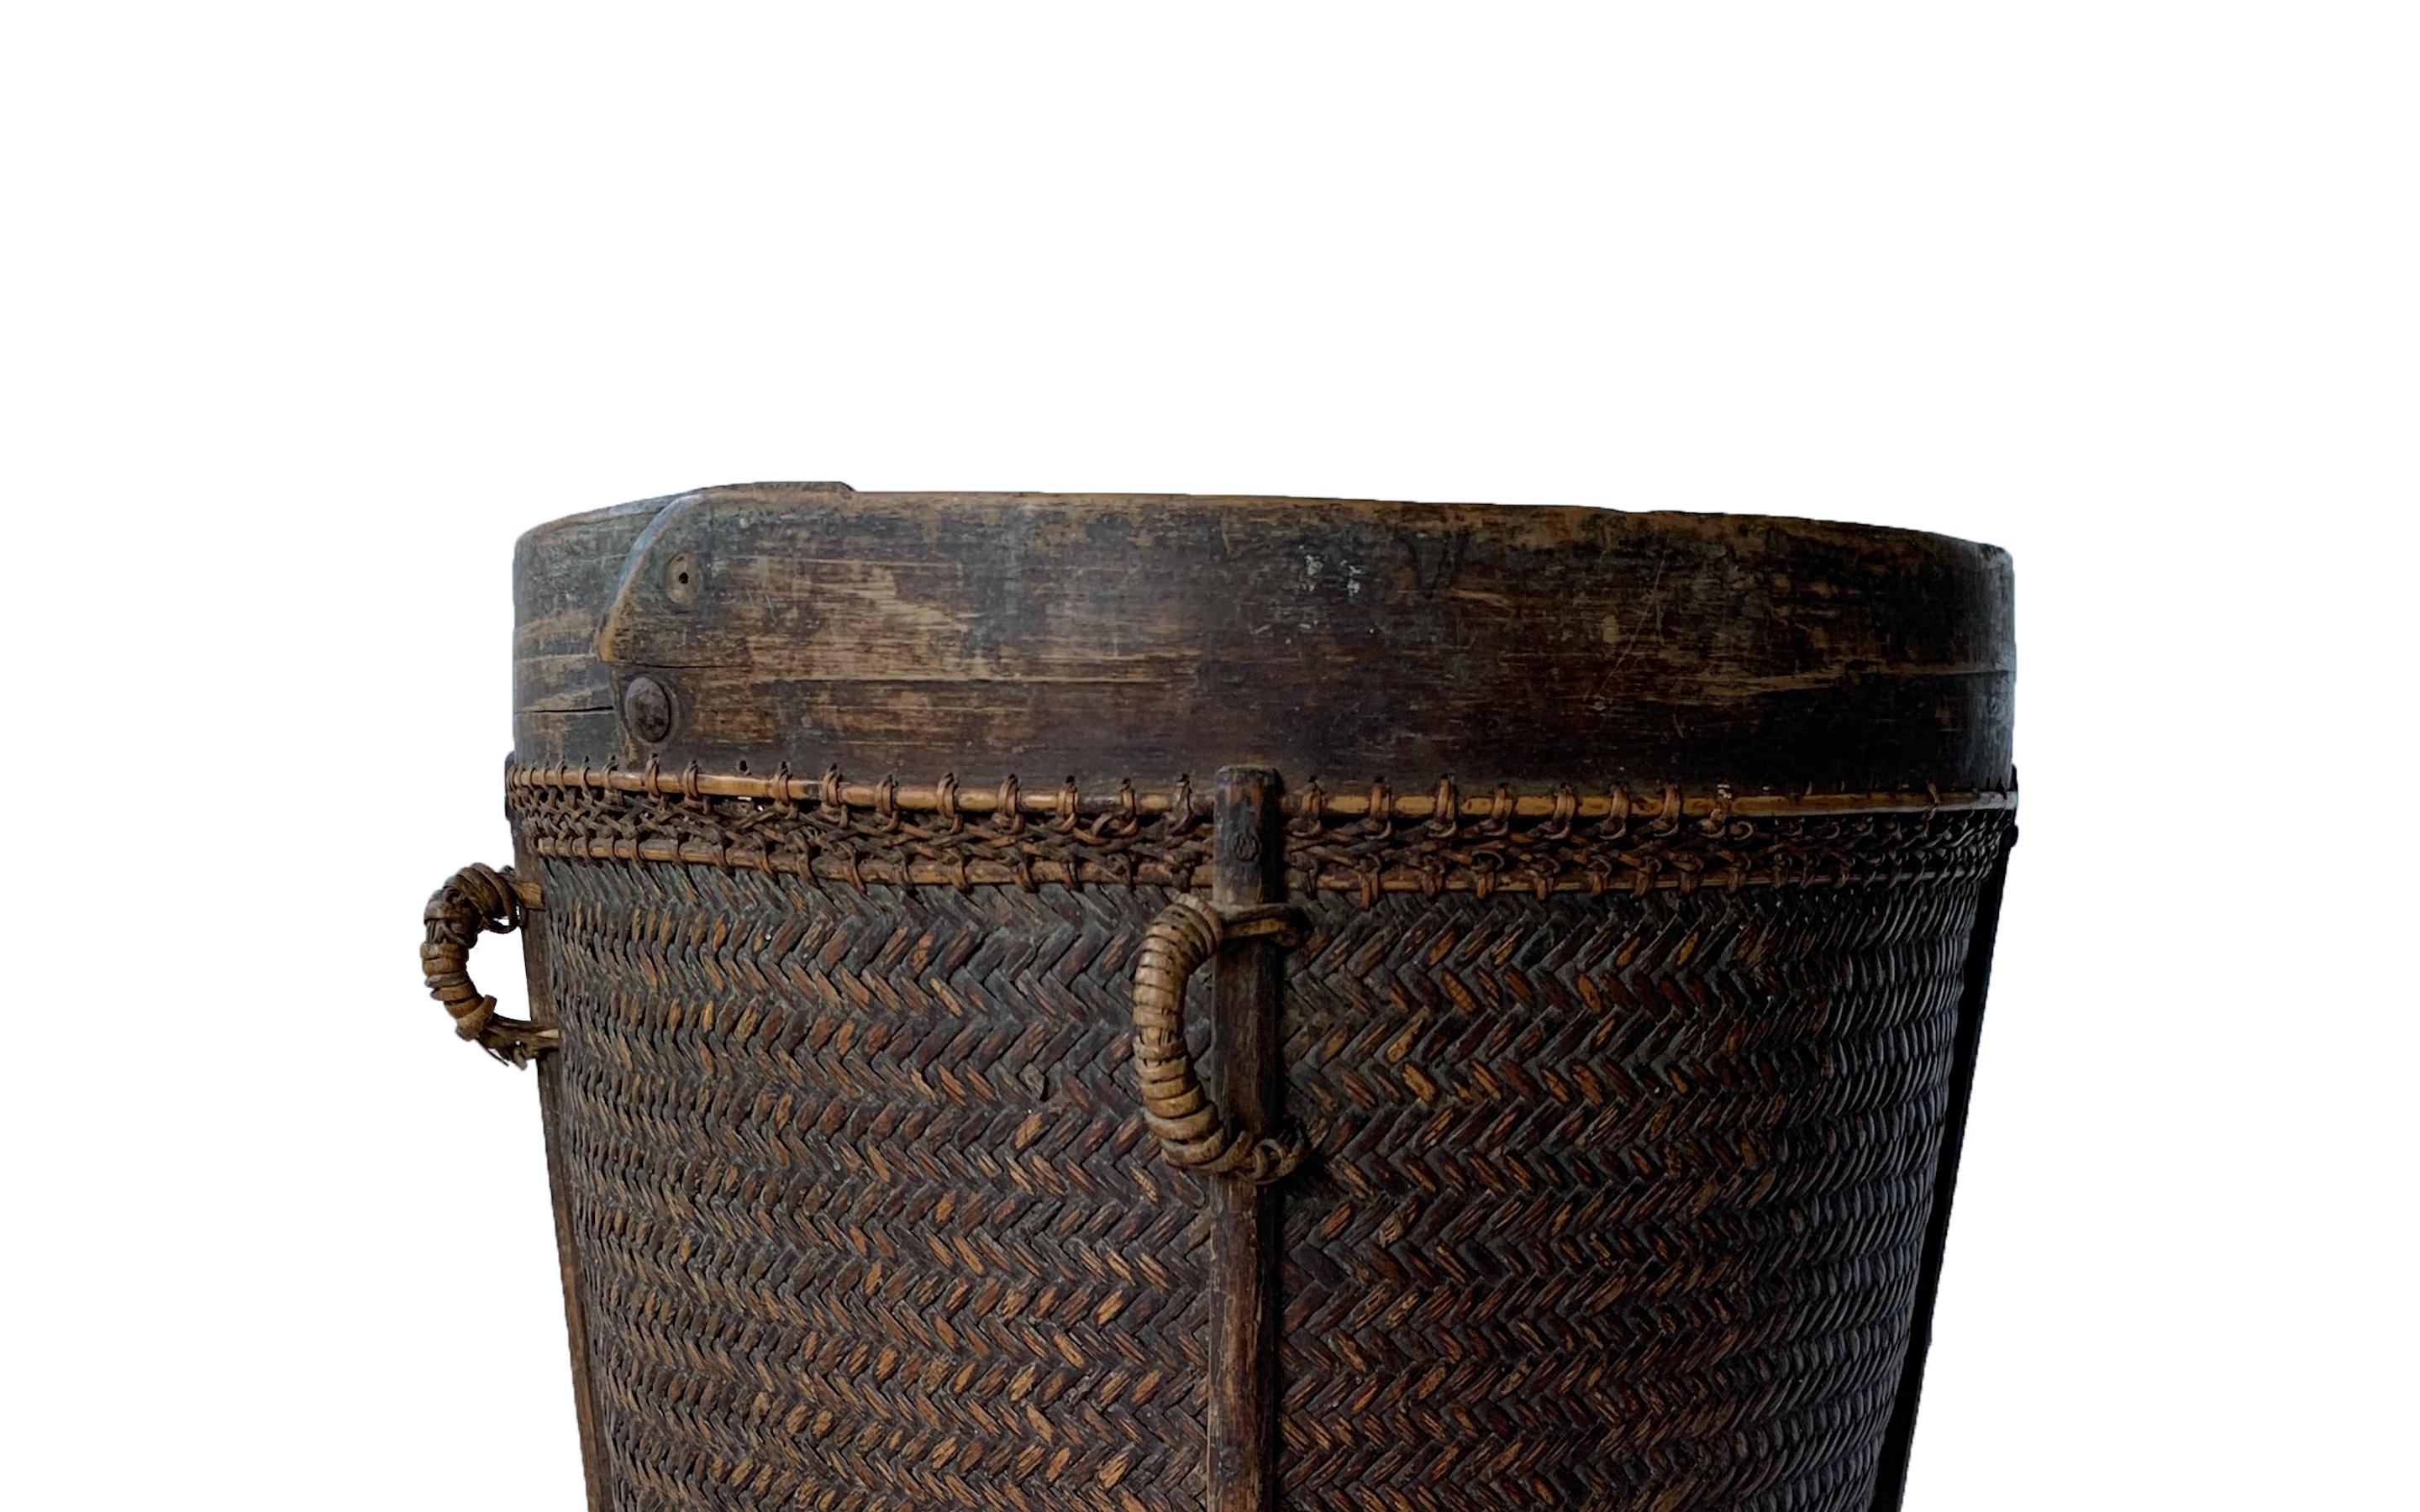 Indonesian Rattan Basket Dayak Tribe Hand-Woven from Kalimantan, Borneo, Mid 20th Century